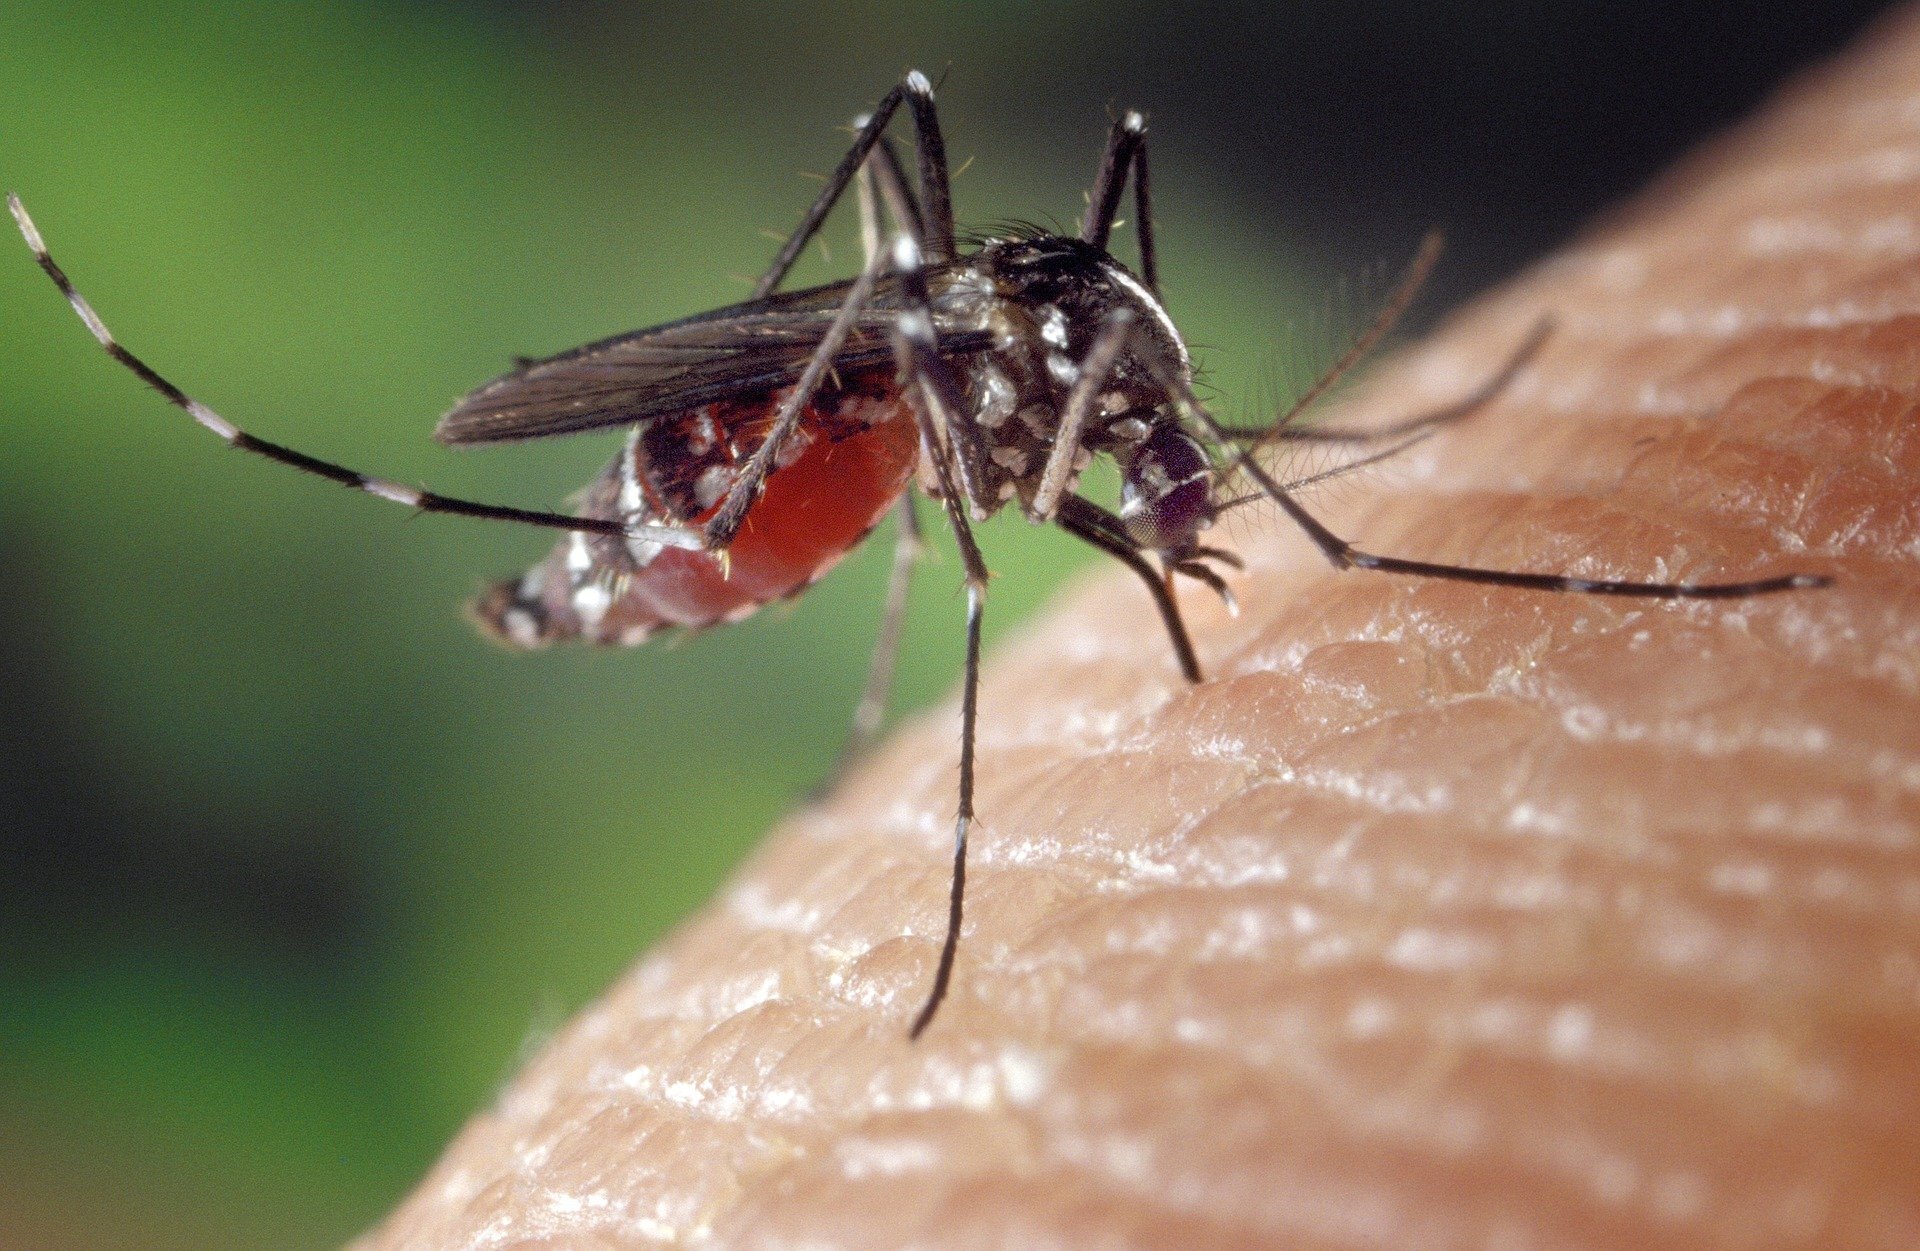 New research shows poor insecticide policy led to countless needless malaria cases